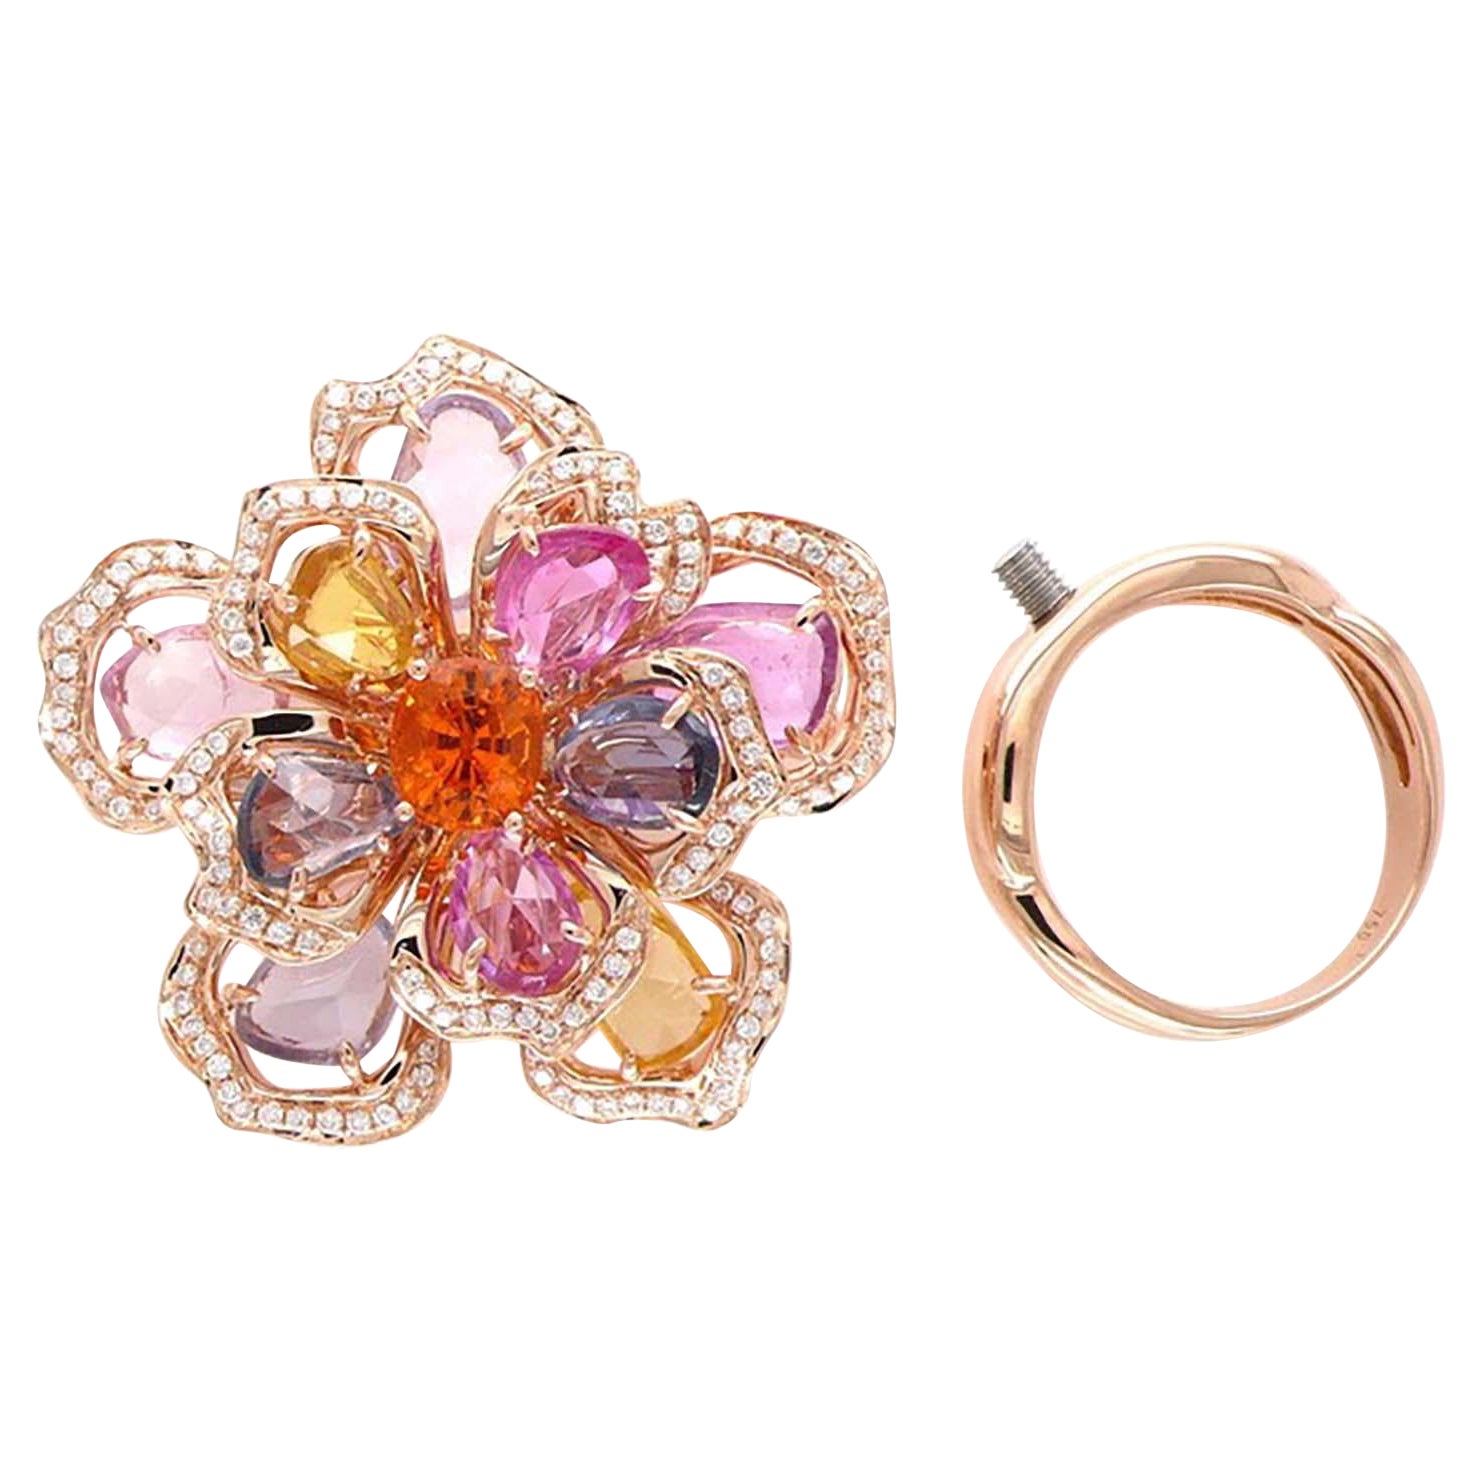 3in1 Flower Collection Pendant Brooch Ring with Multicolor and Mandarin Sapphire For Sale